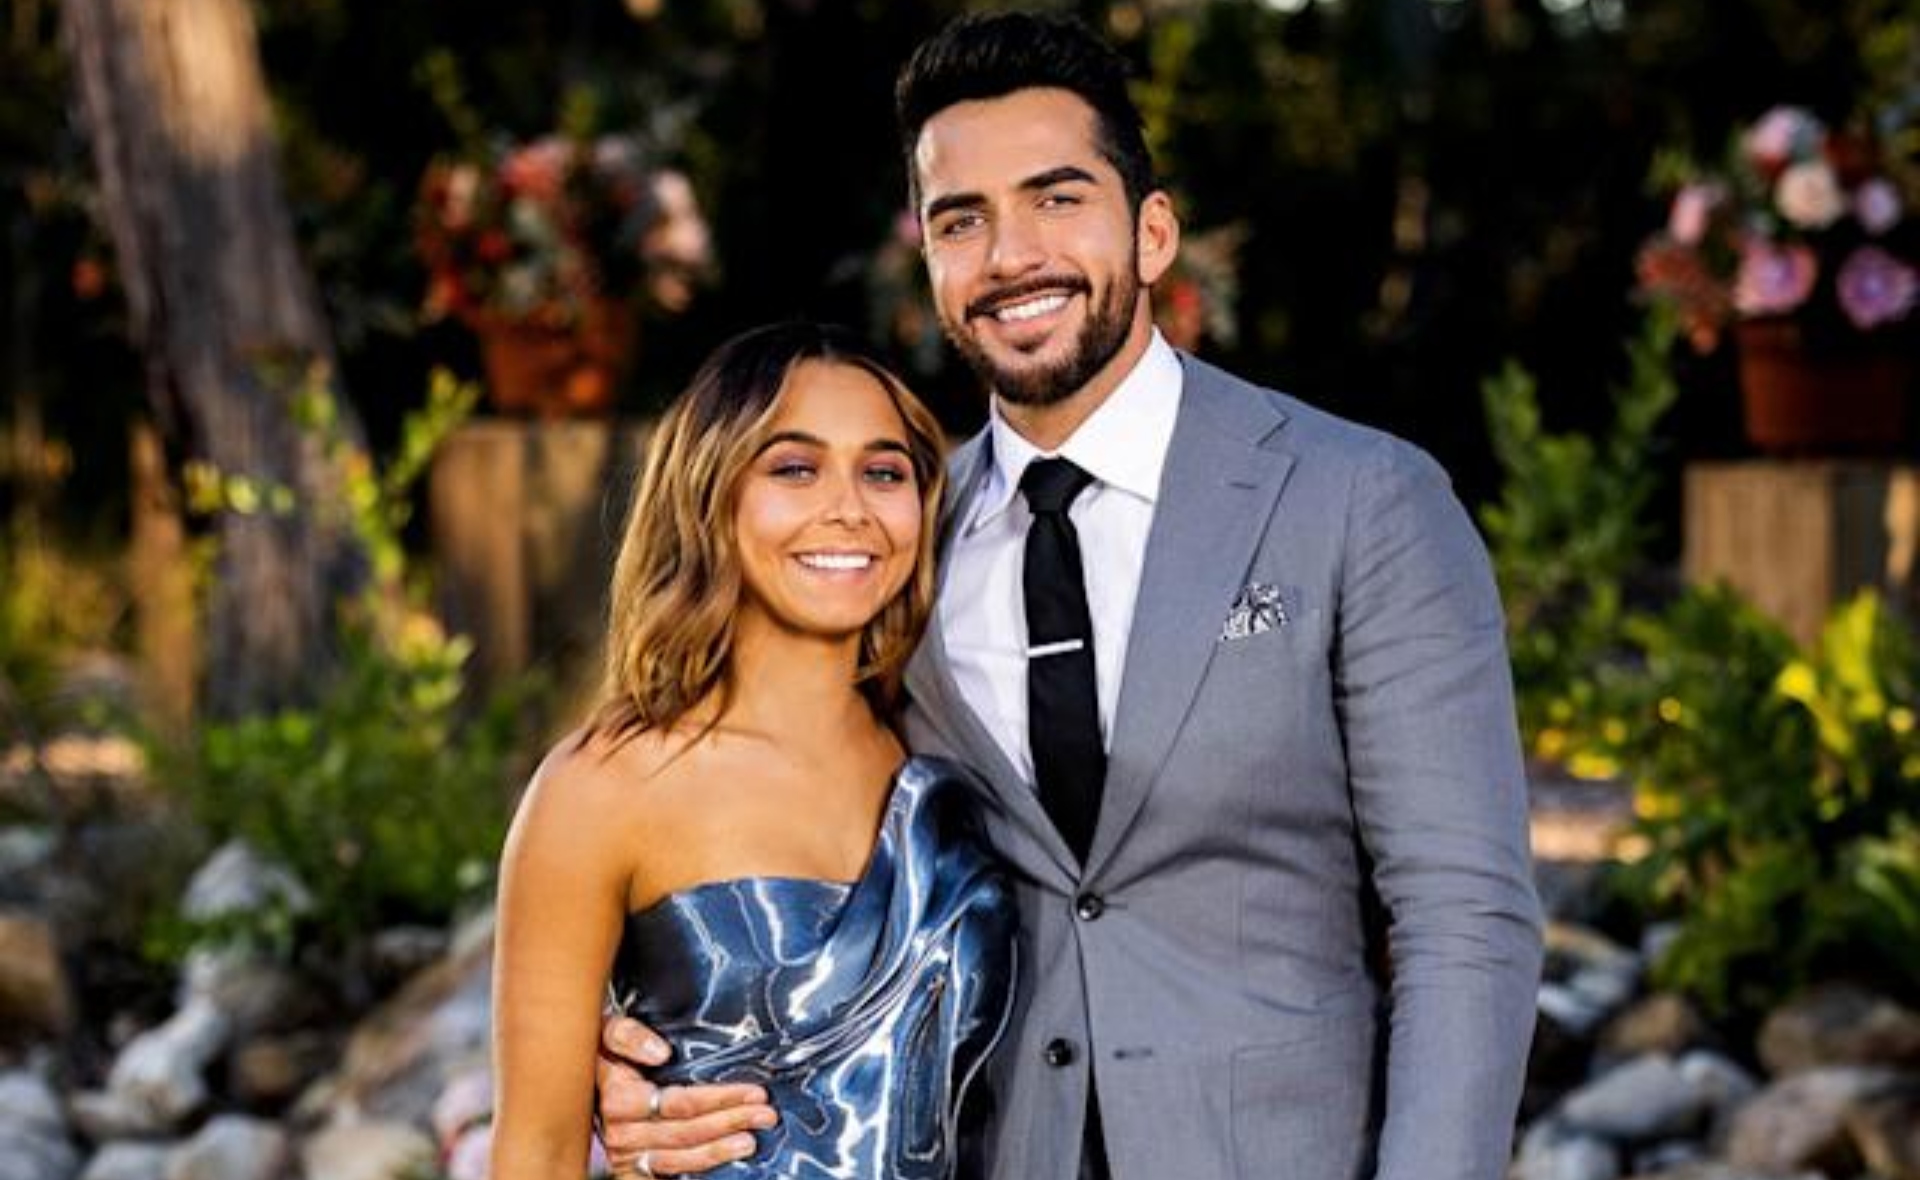 The Most Powerful Moment On ‘The Bachelorette’ 2021 Happened While Brooke Blurton Was Off-Camera